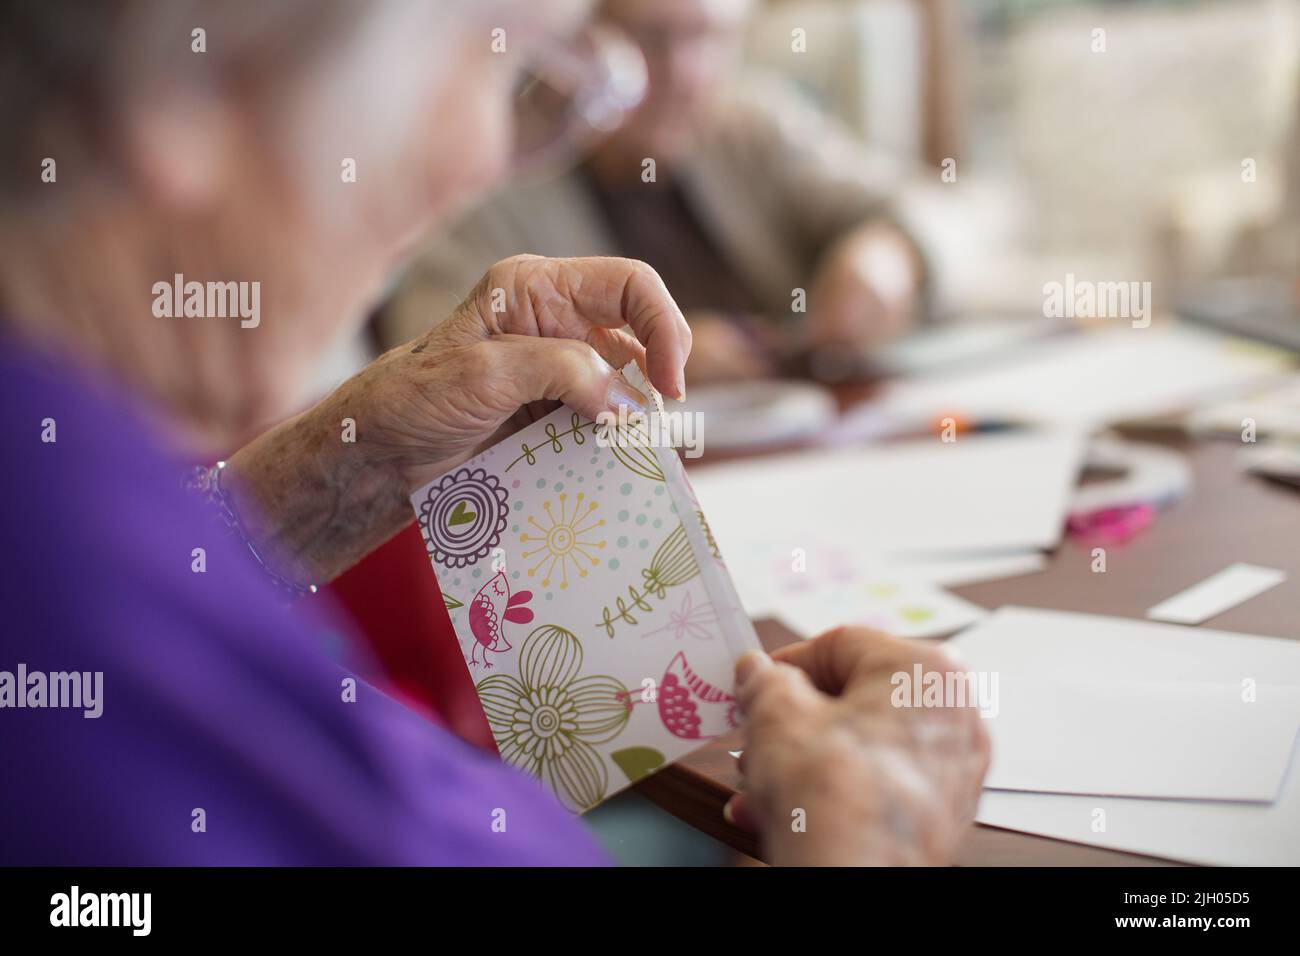 CLOSE UP OF  AN ELDERLY LADY IN AN AGED CARE HOME DOING CARD MAKING Stock Photo